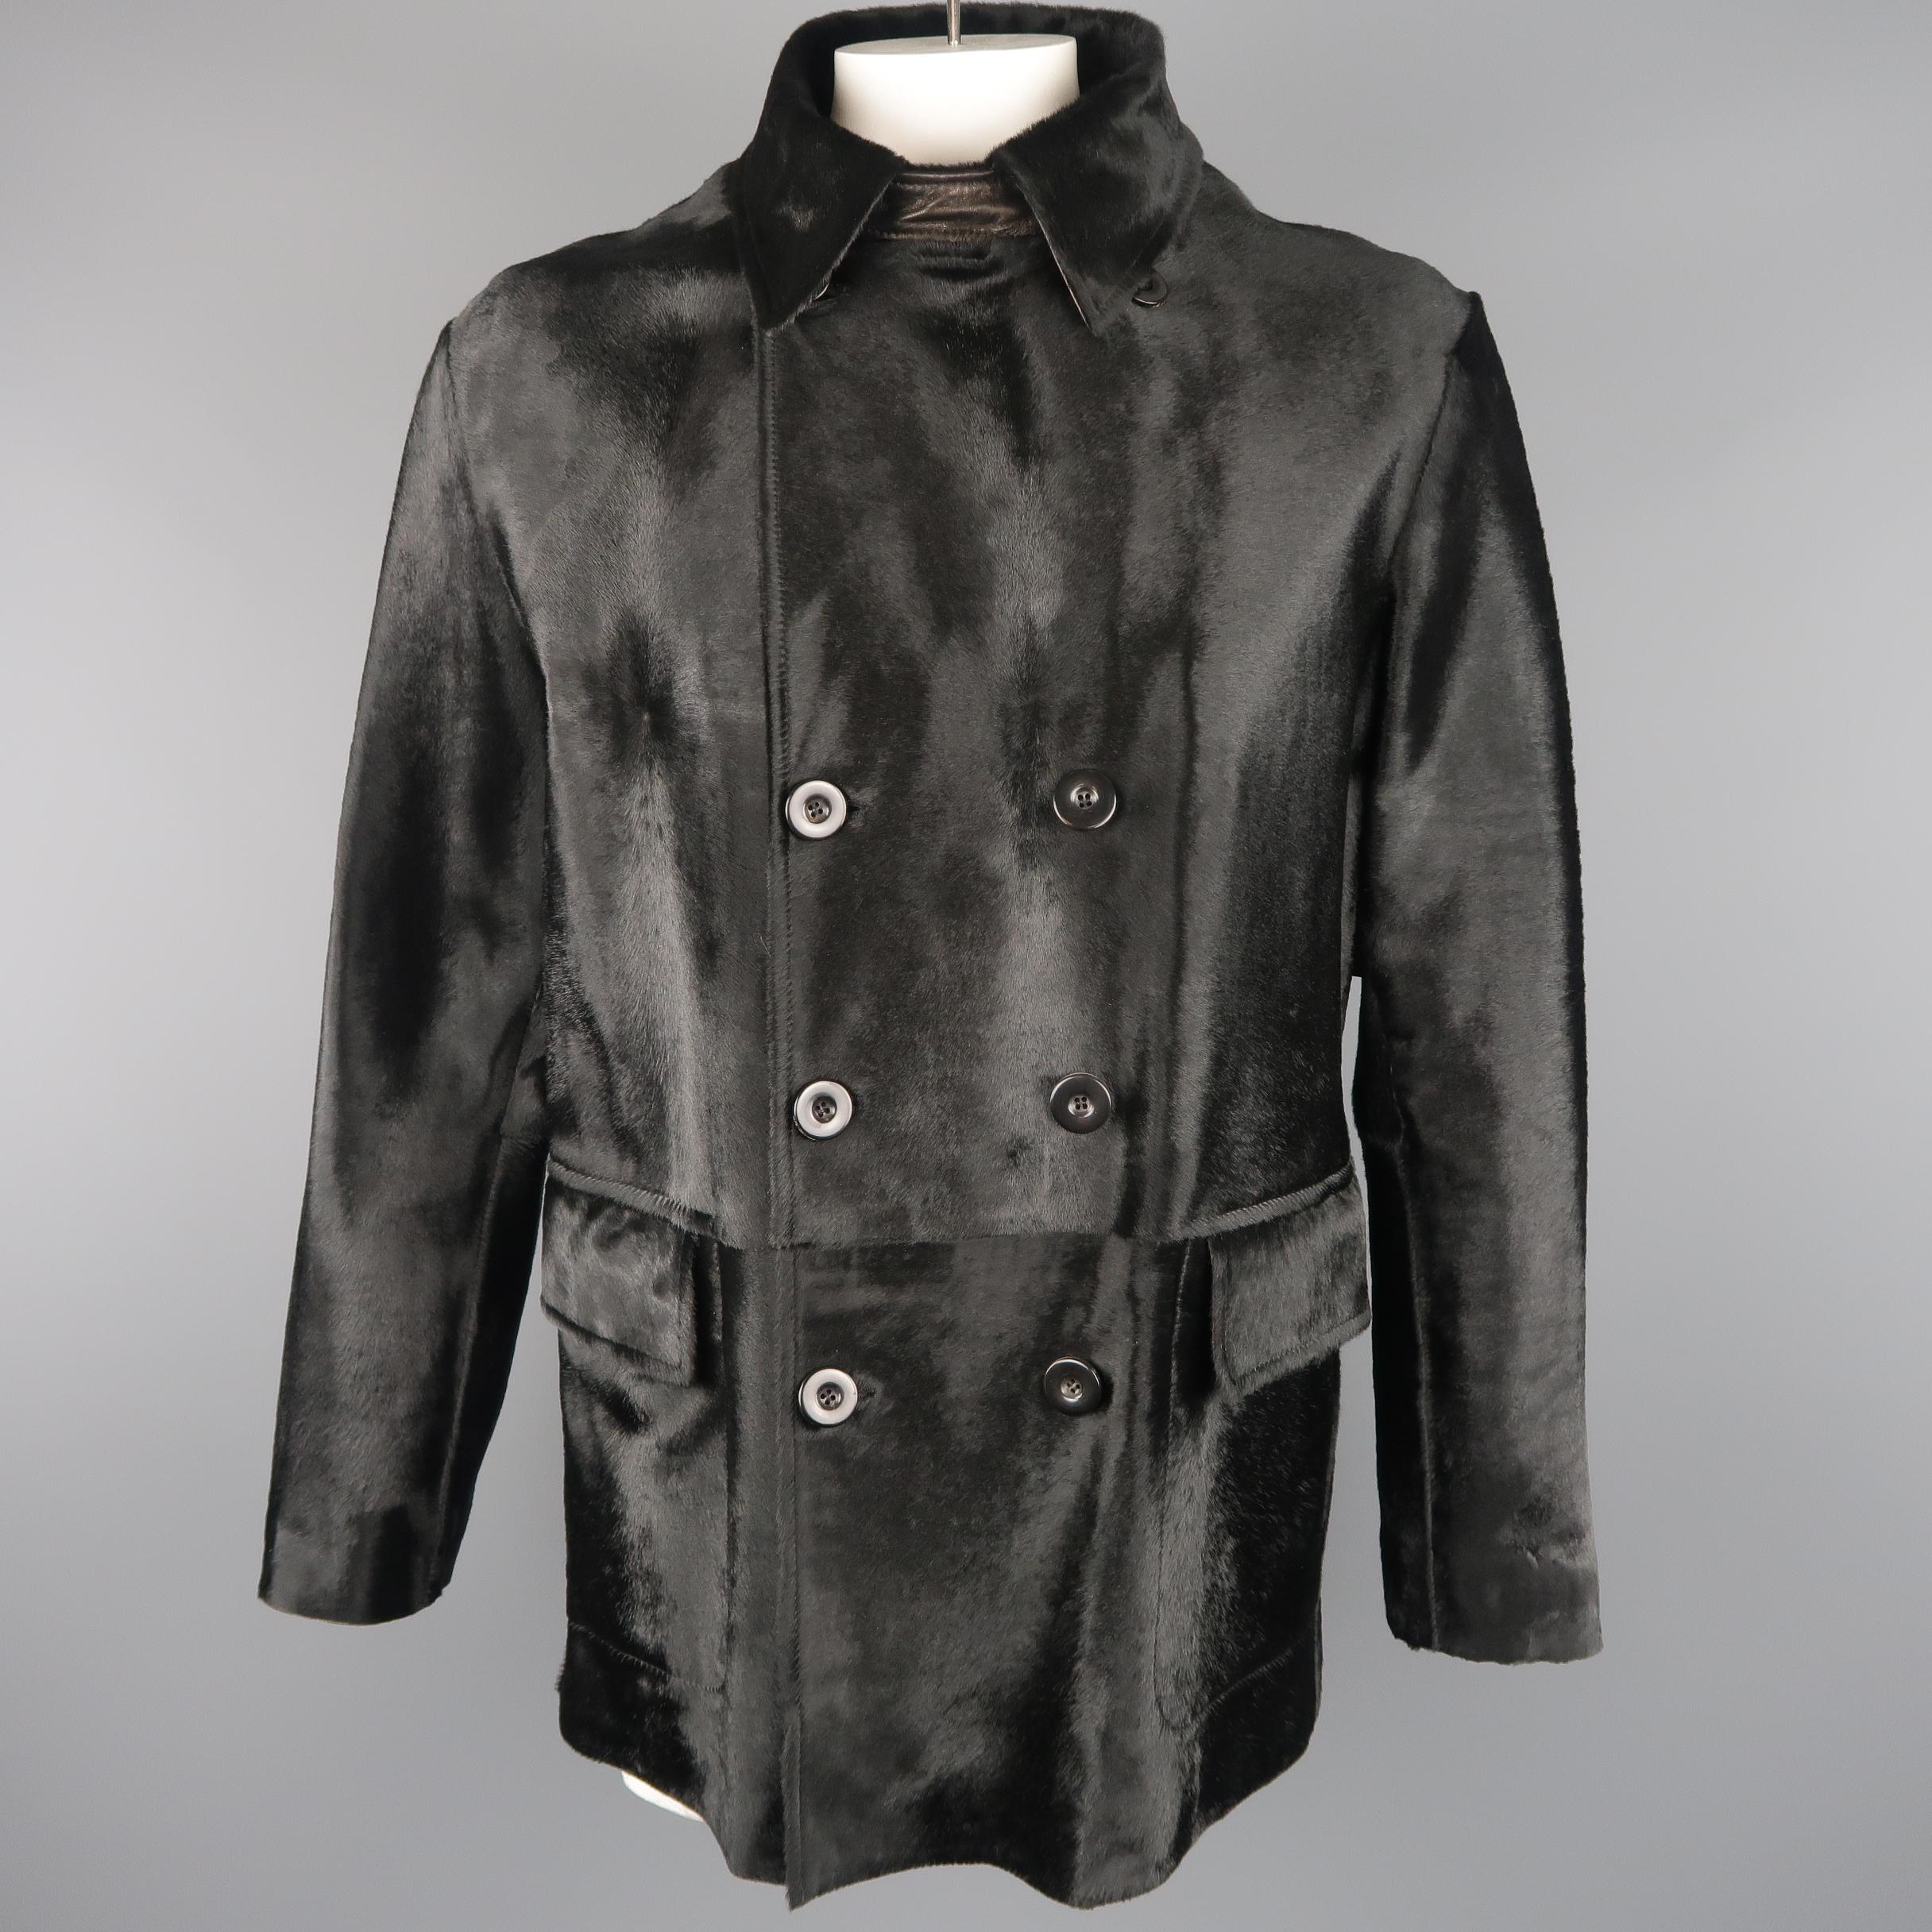 ARMANI COLLEZIONI LUXURY line jacket comes in black ponyhair leather with a pointed collar, double breasted button up front, and large lap pockets.
 
Excellent Pre-Owned Condition.
Marked: IT 56
 
Measurements:
 
Shoulder: 21 in.
Chest: 46